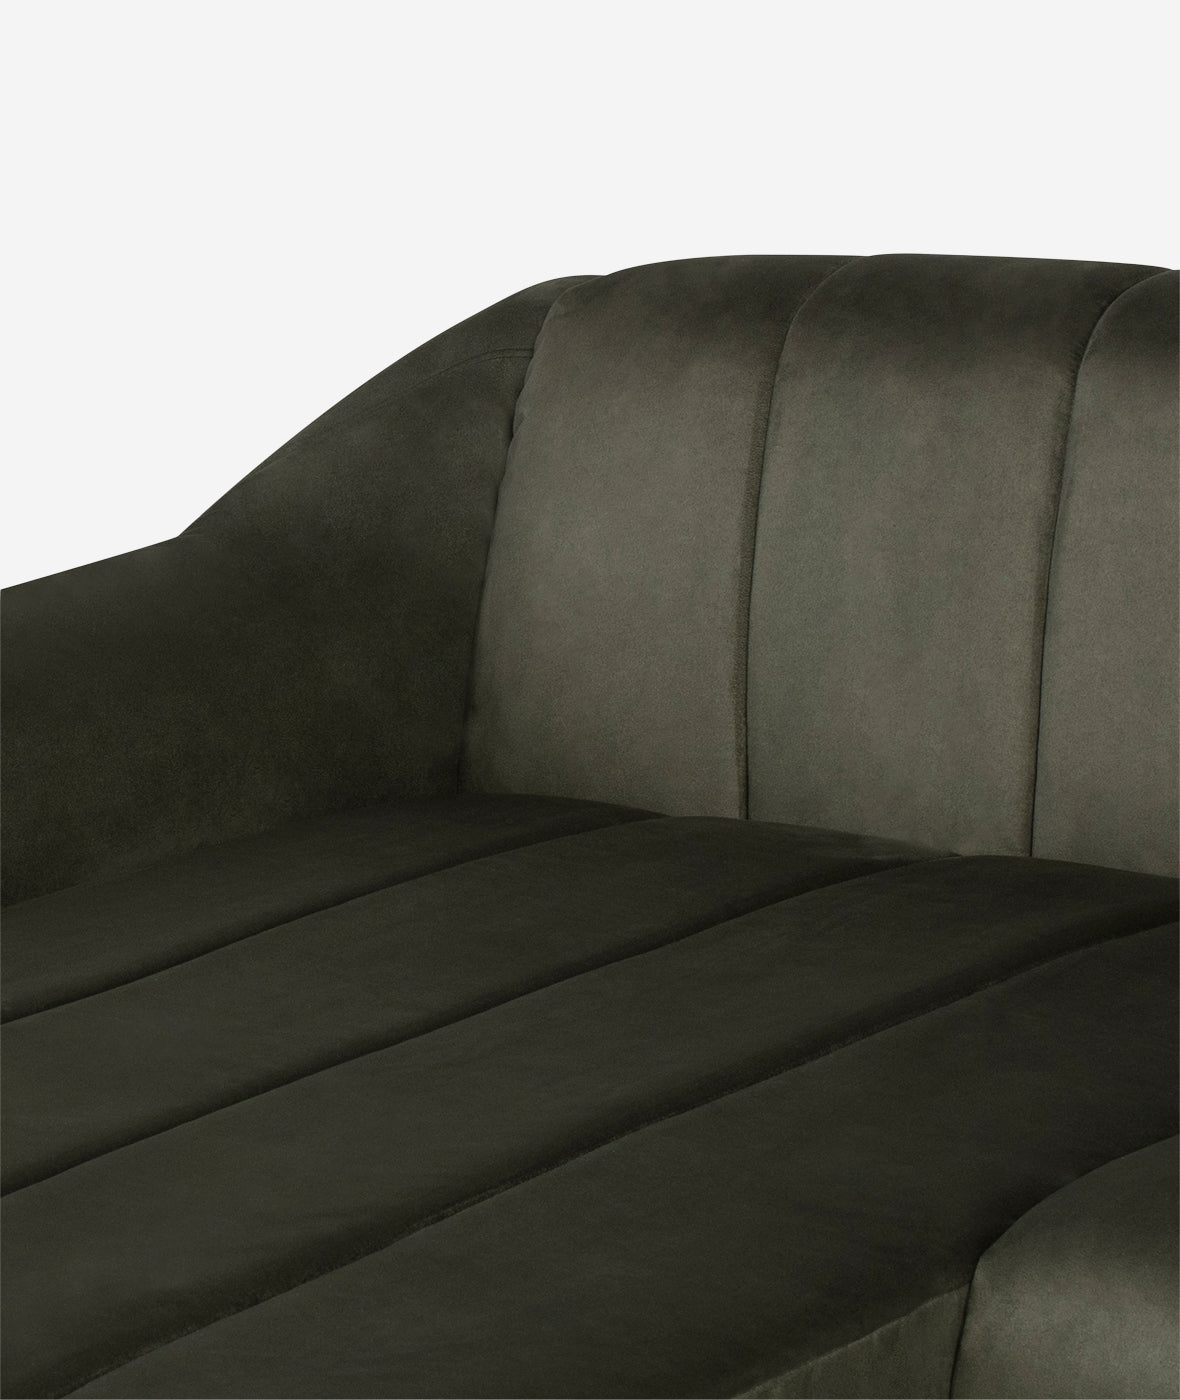 Coraline Sectional - More Options